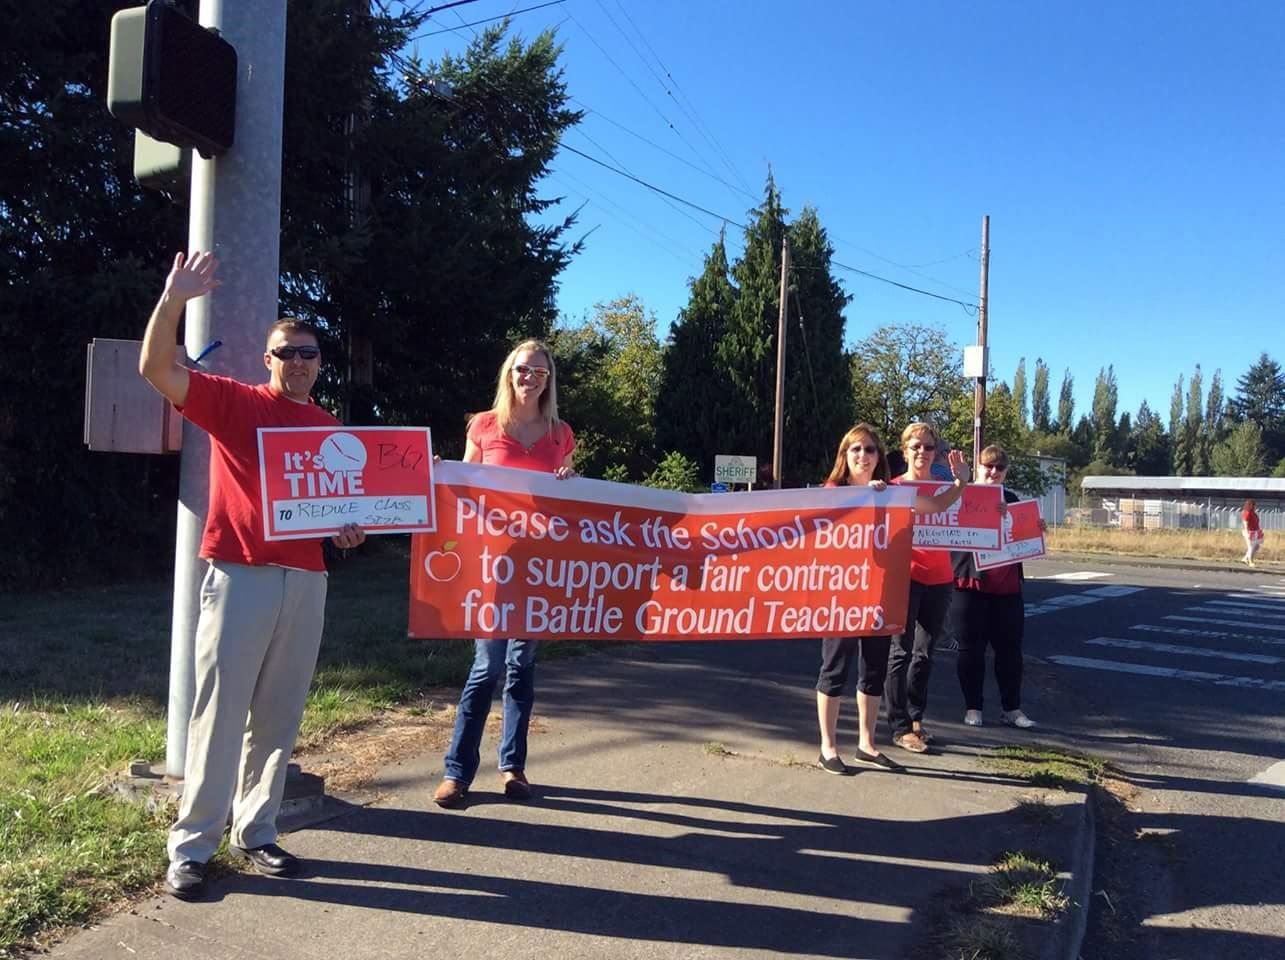 Battle Ground teachers, who have been without a contract since Sept. 1, wave banners in support of a fair contract.